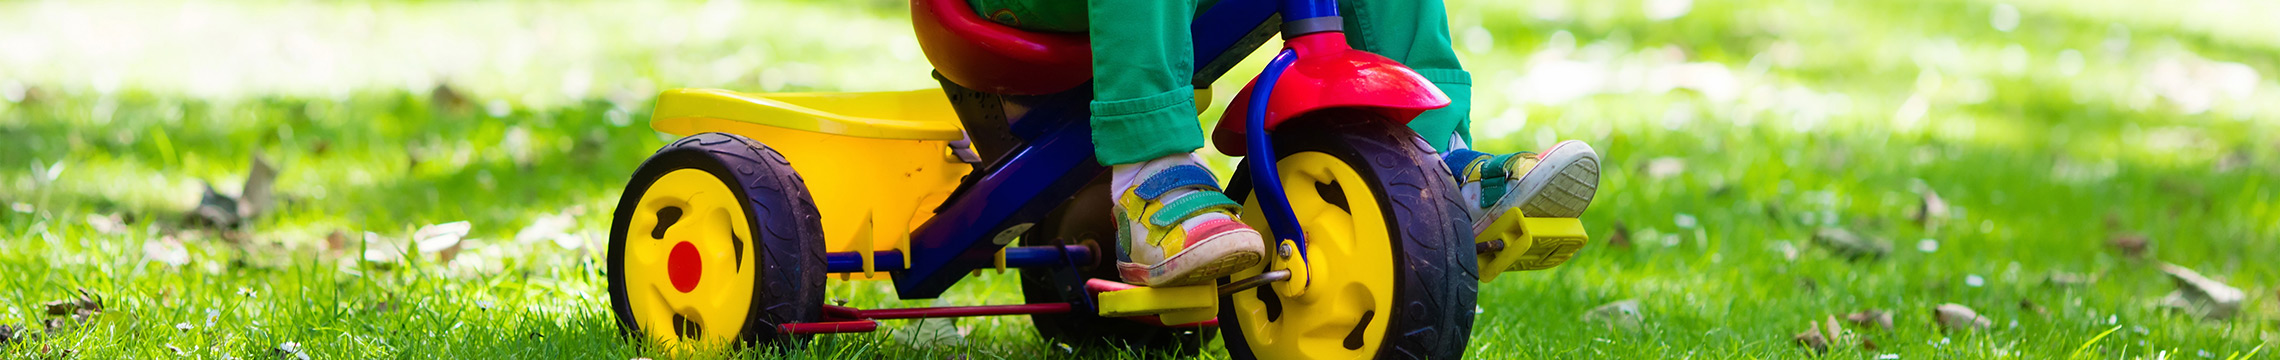 Little kid in multicolored outfit rides on a tricycle while eating a lollipop